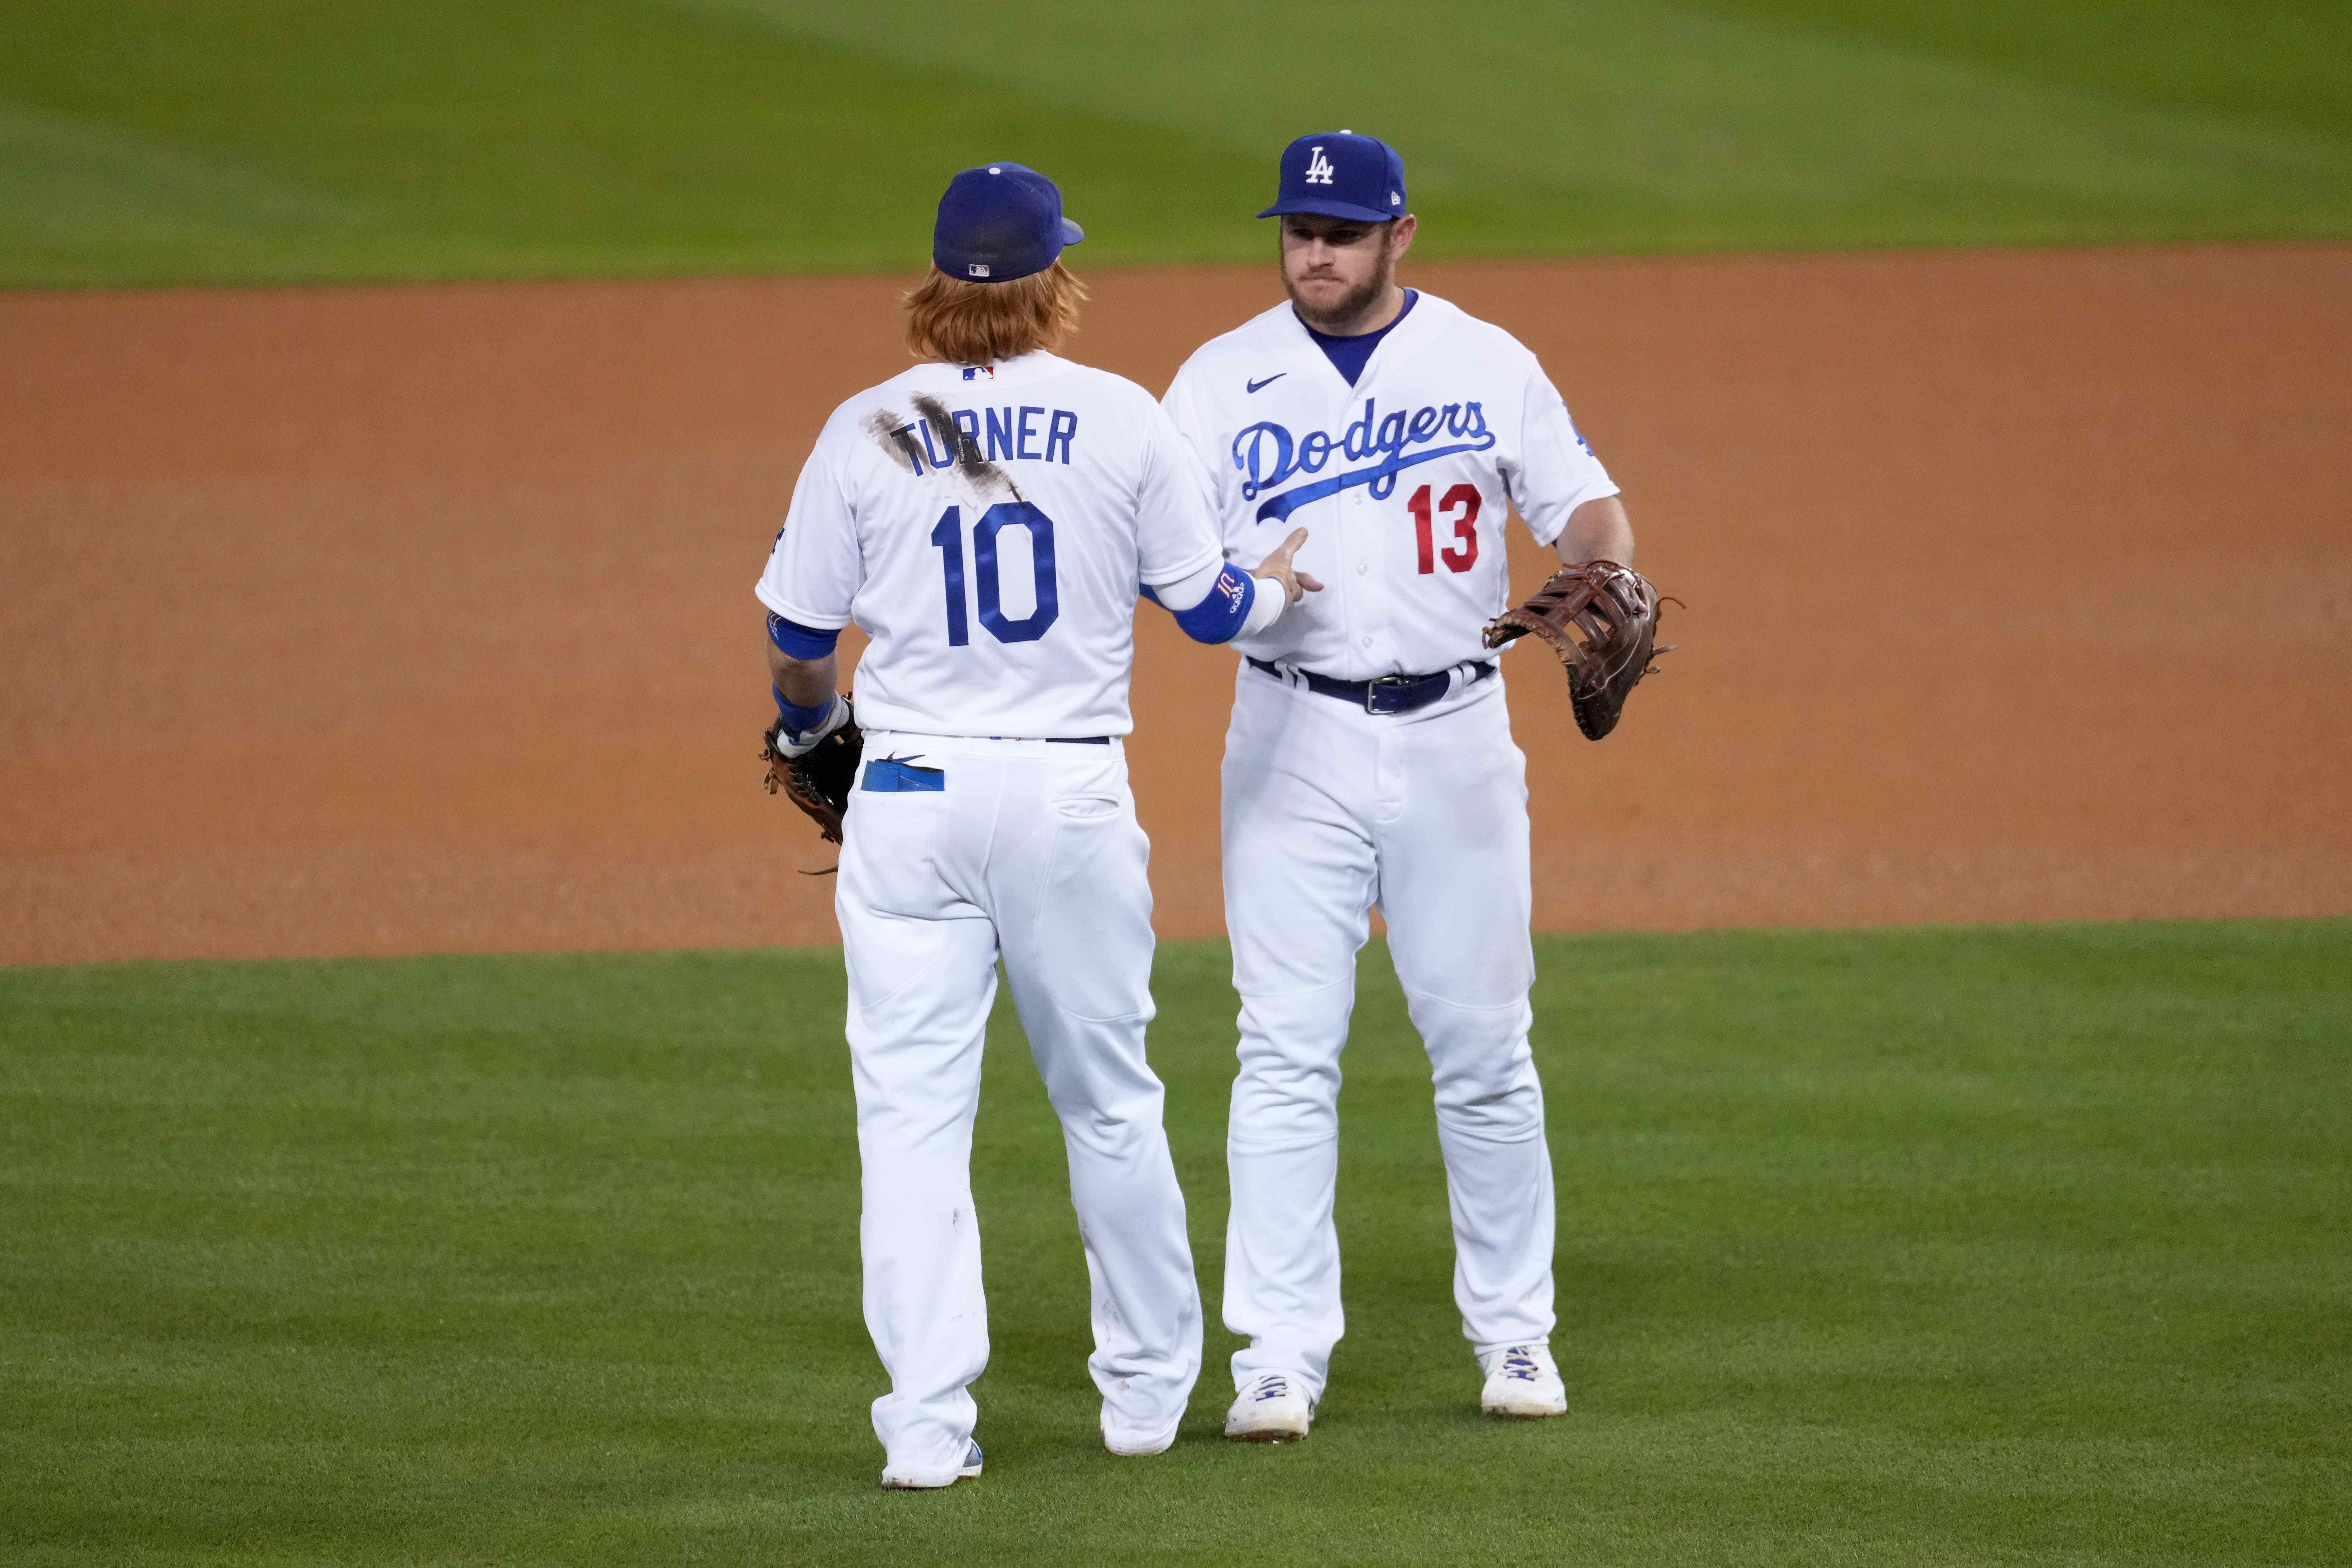 Los Angeles Dodgers third baseman Justin Turner and first baseman Max Muncy celebrate after the game against the Seattle Mariners at Dodger Stadium.